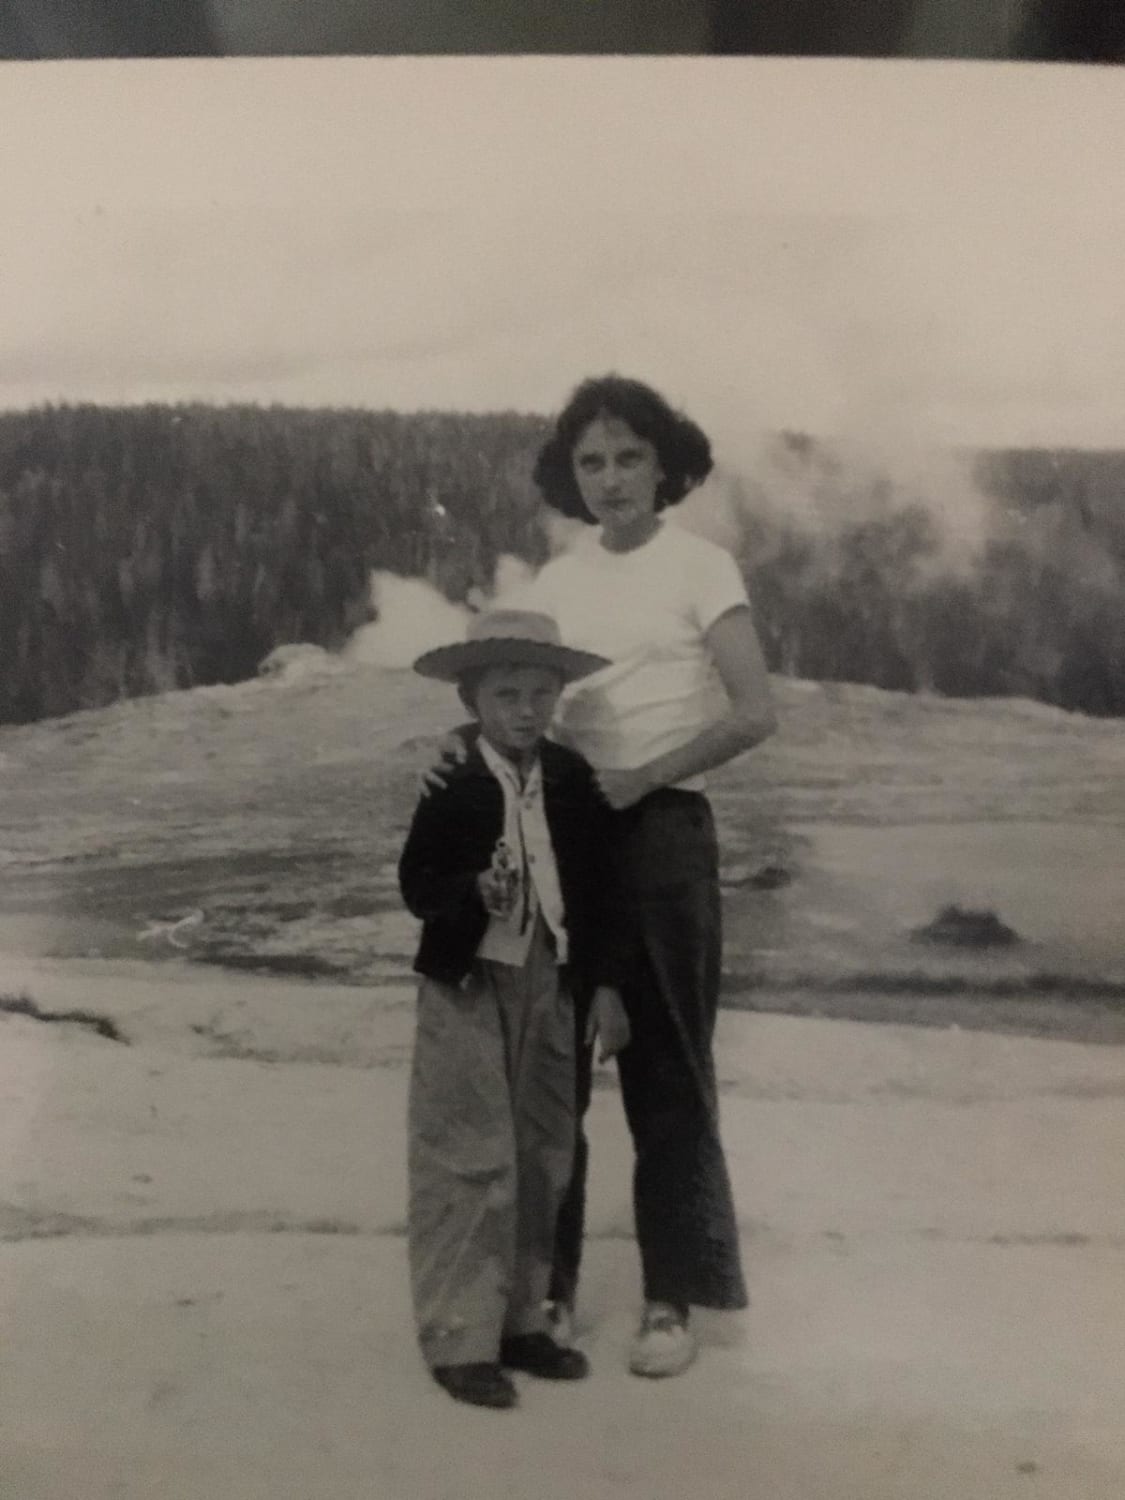 My grandma and her little brother, in Yellowstone National Park, 1940s.